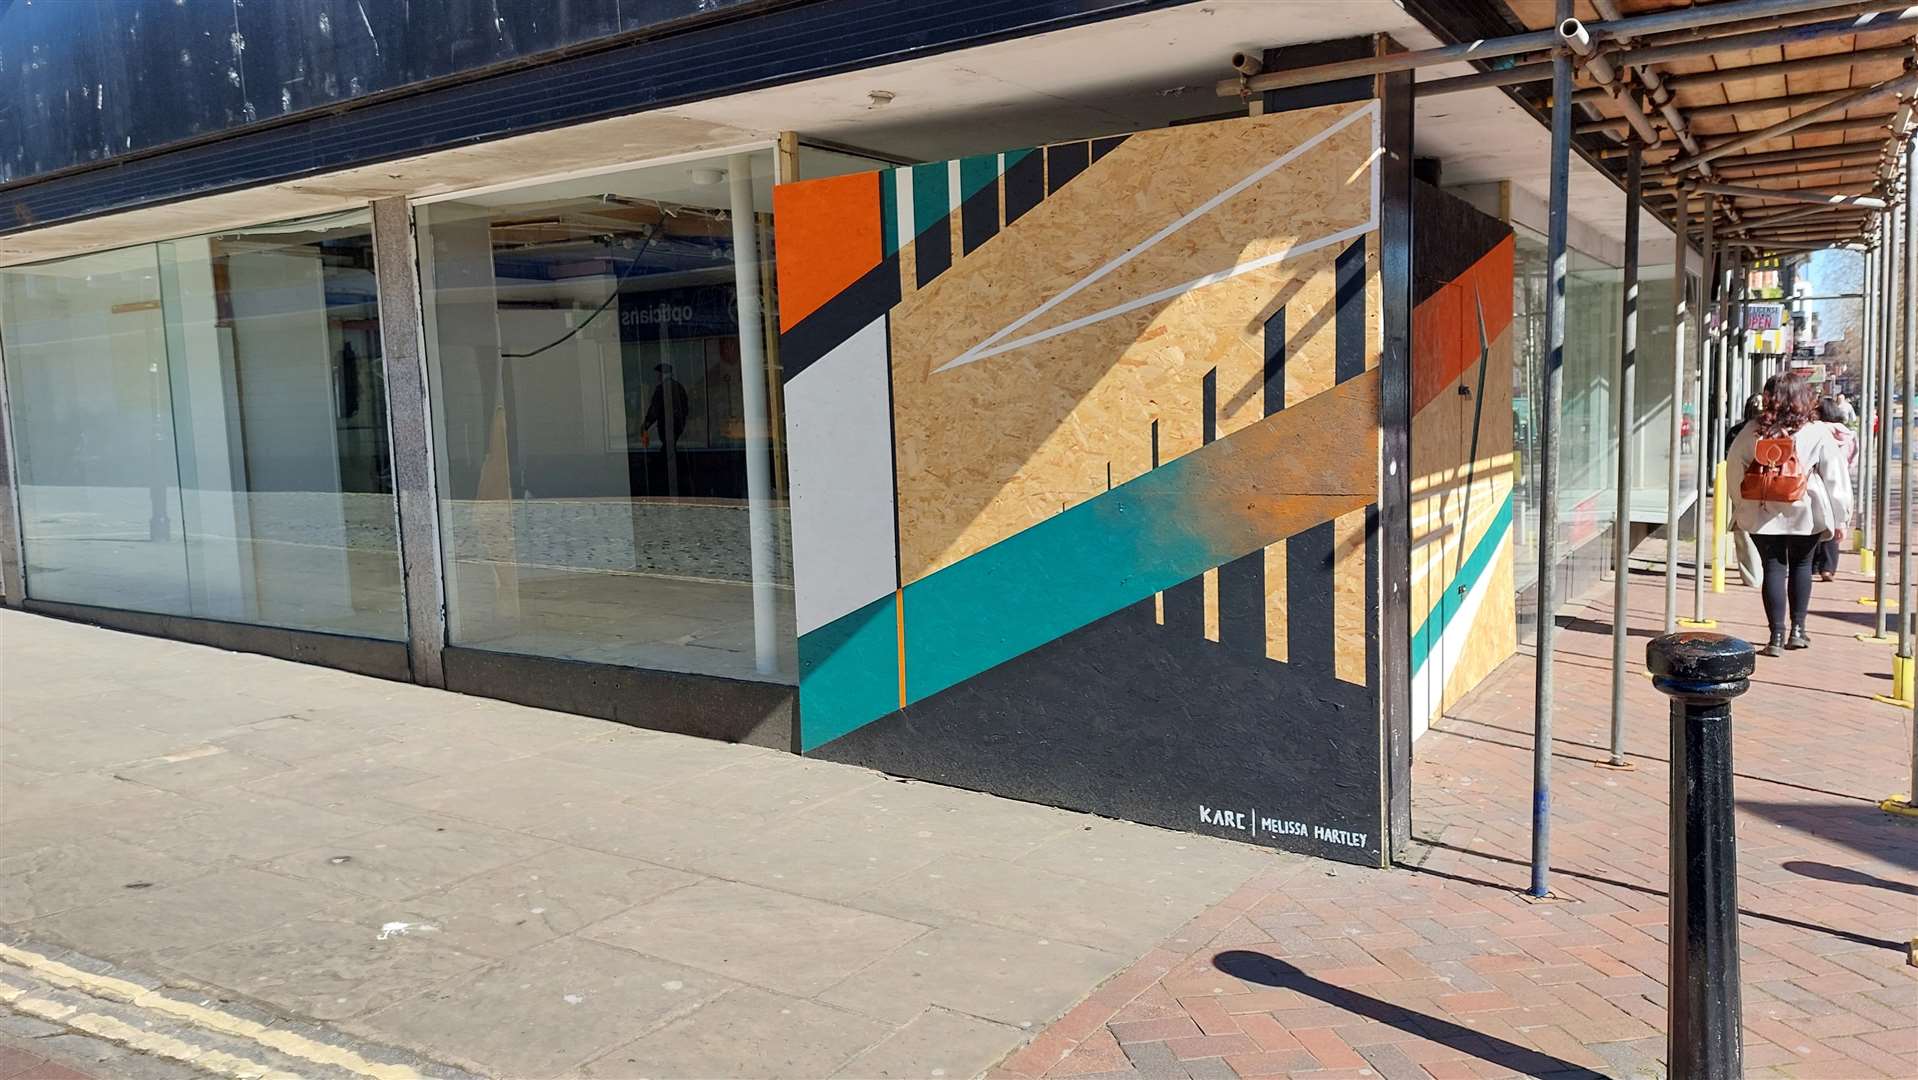 Melissa Hartley and Karc's mural in the high street